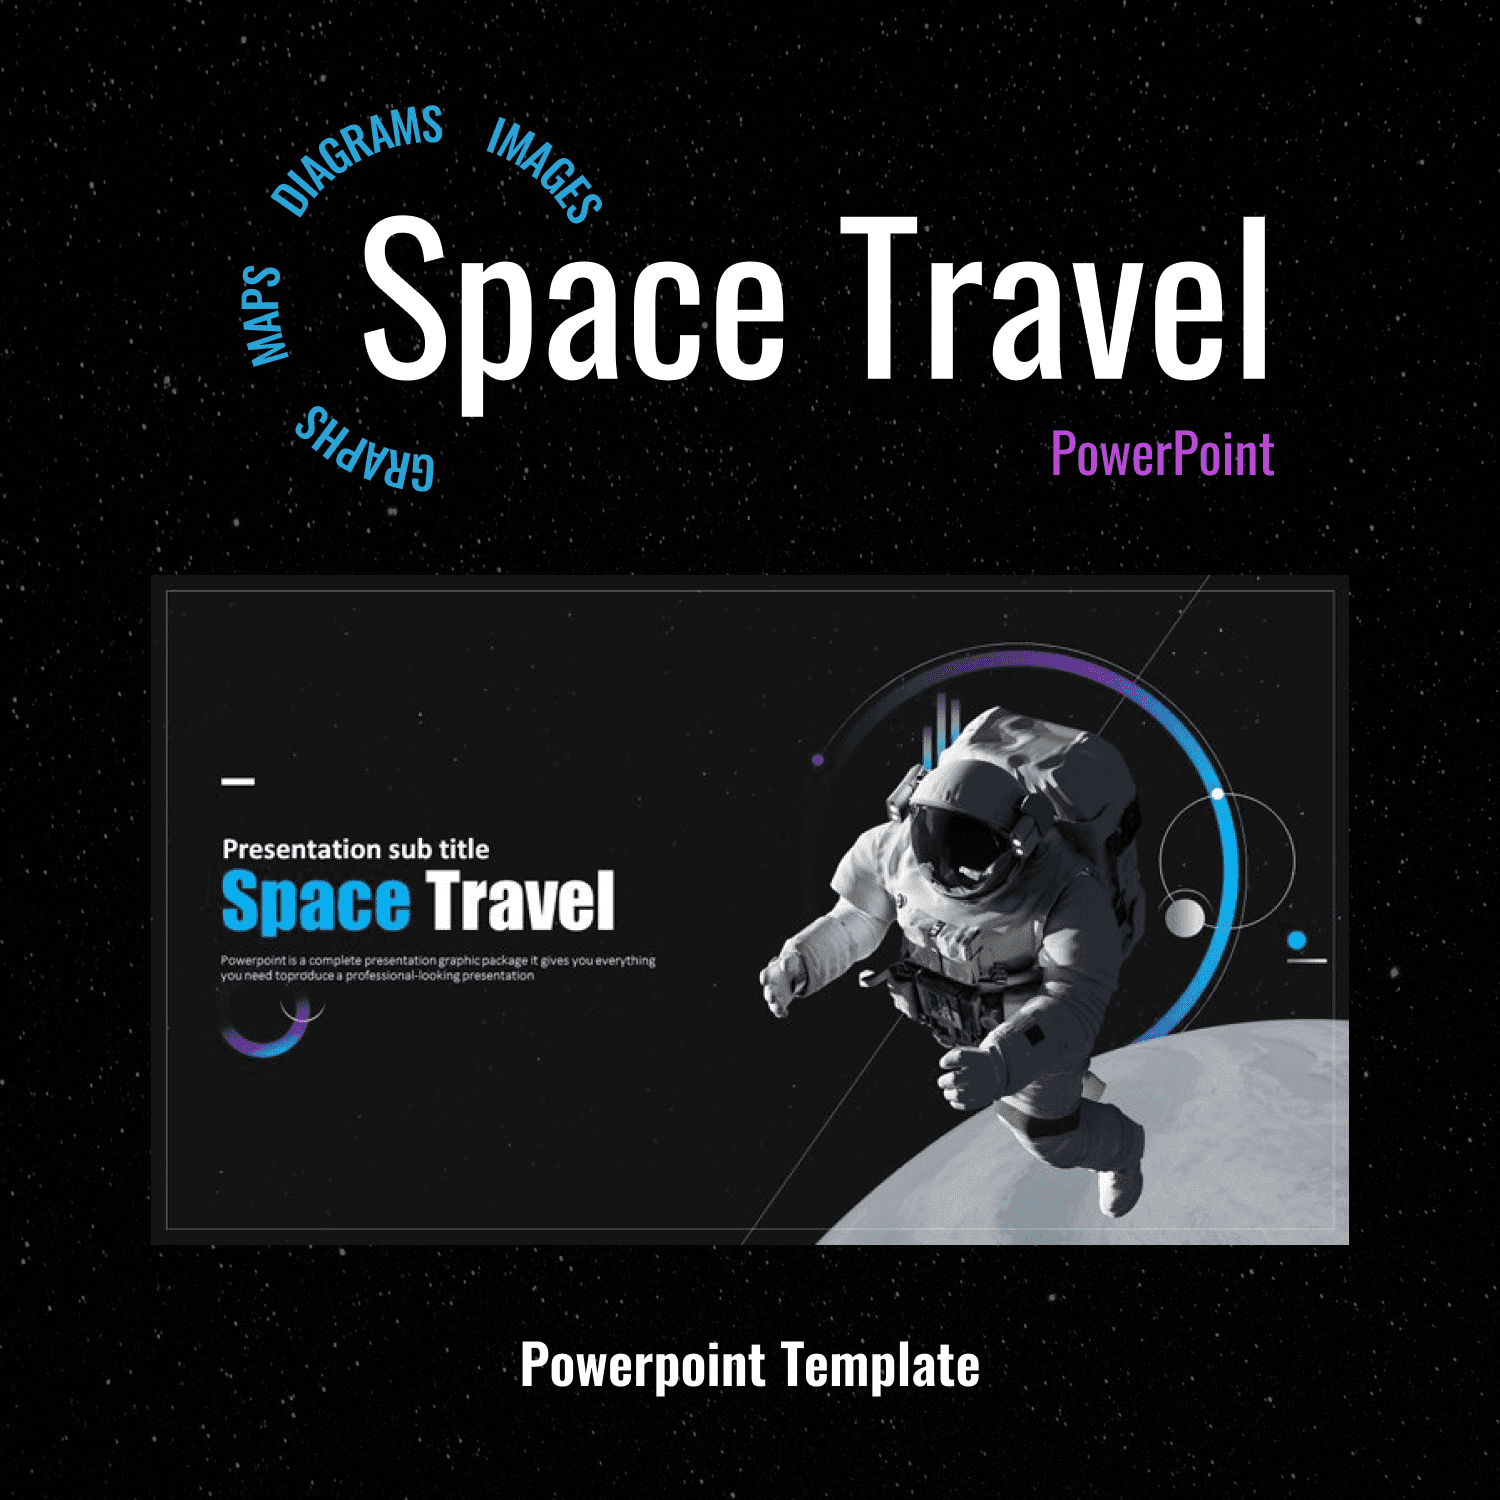 space travel powerpoint cover image.